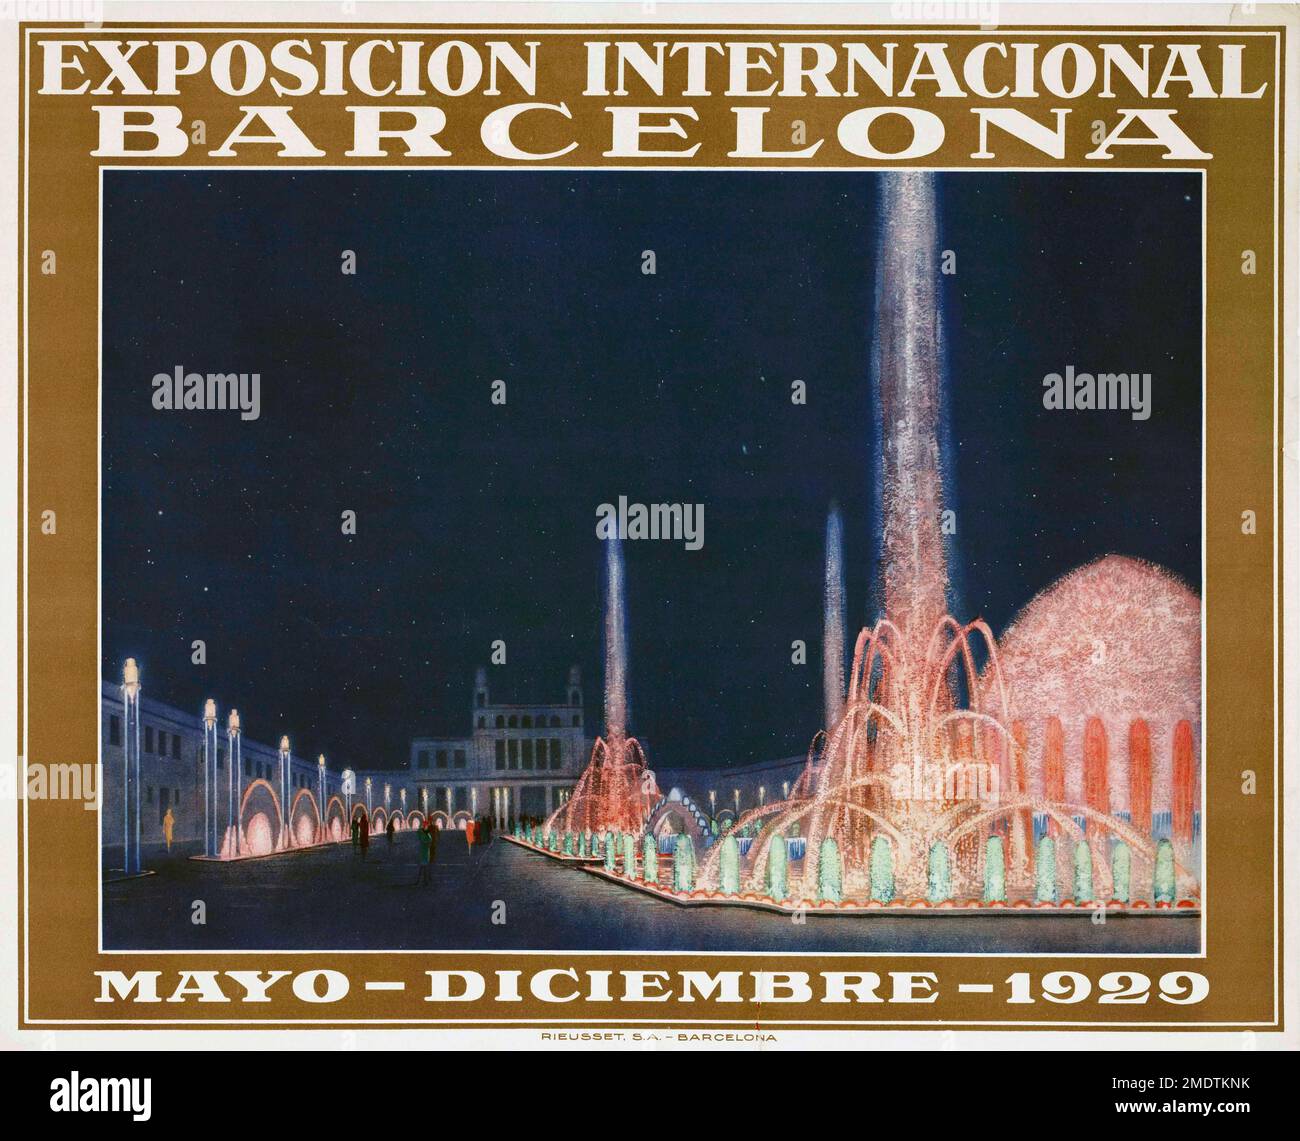 Poster for the International Exhibition in Barcelona, Spain in 1929. Stock Photo